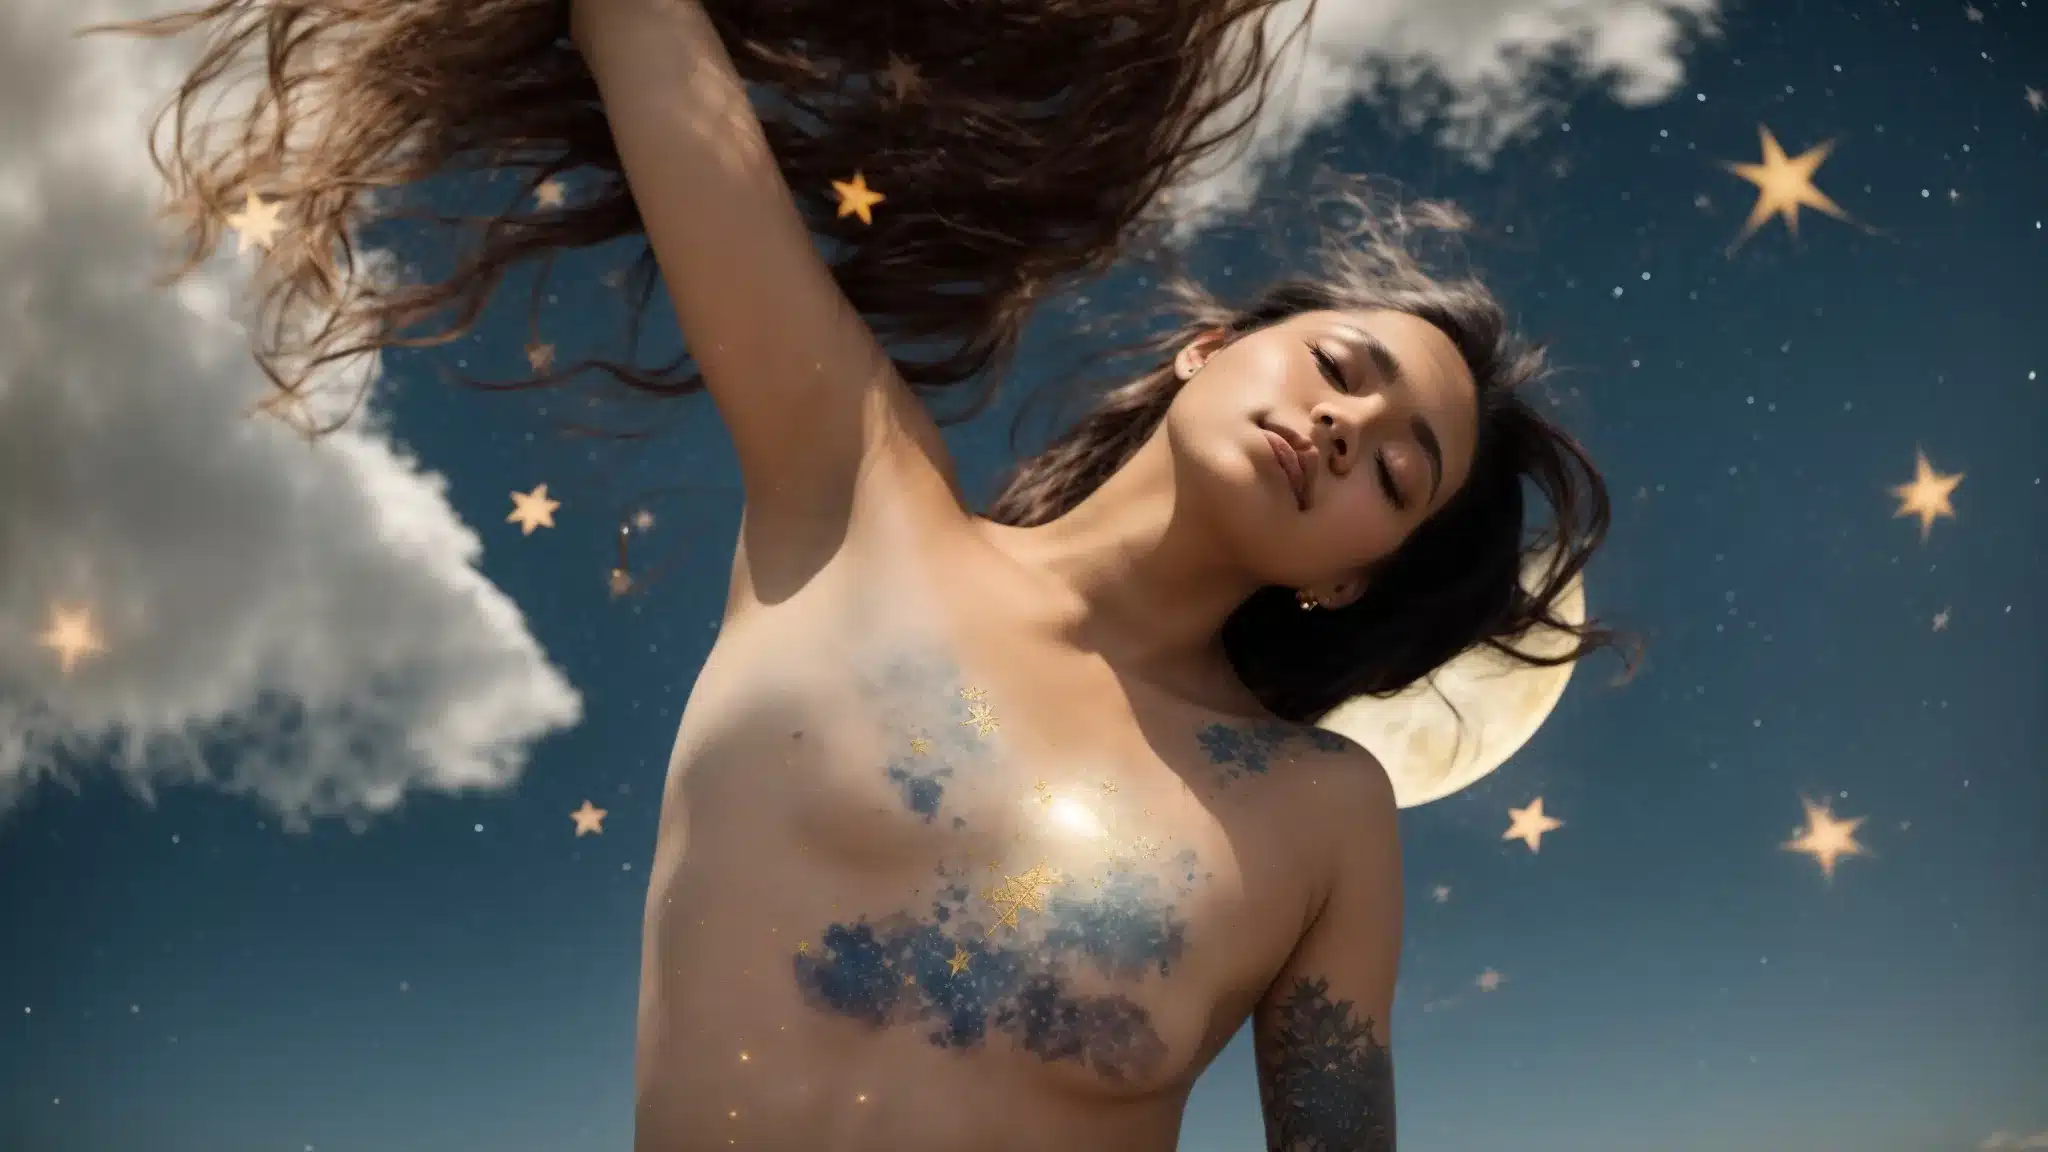 ink-stained skin illuminated by the graceful dance of the sun, moon, and a constellation of stars, capturing a timeless celestial narrative.